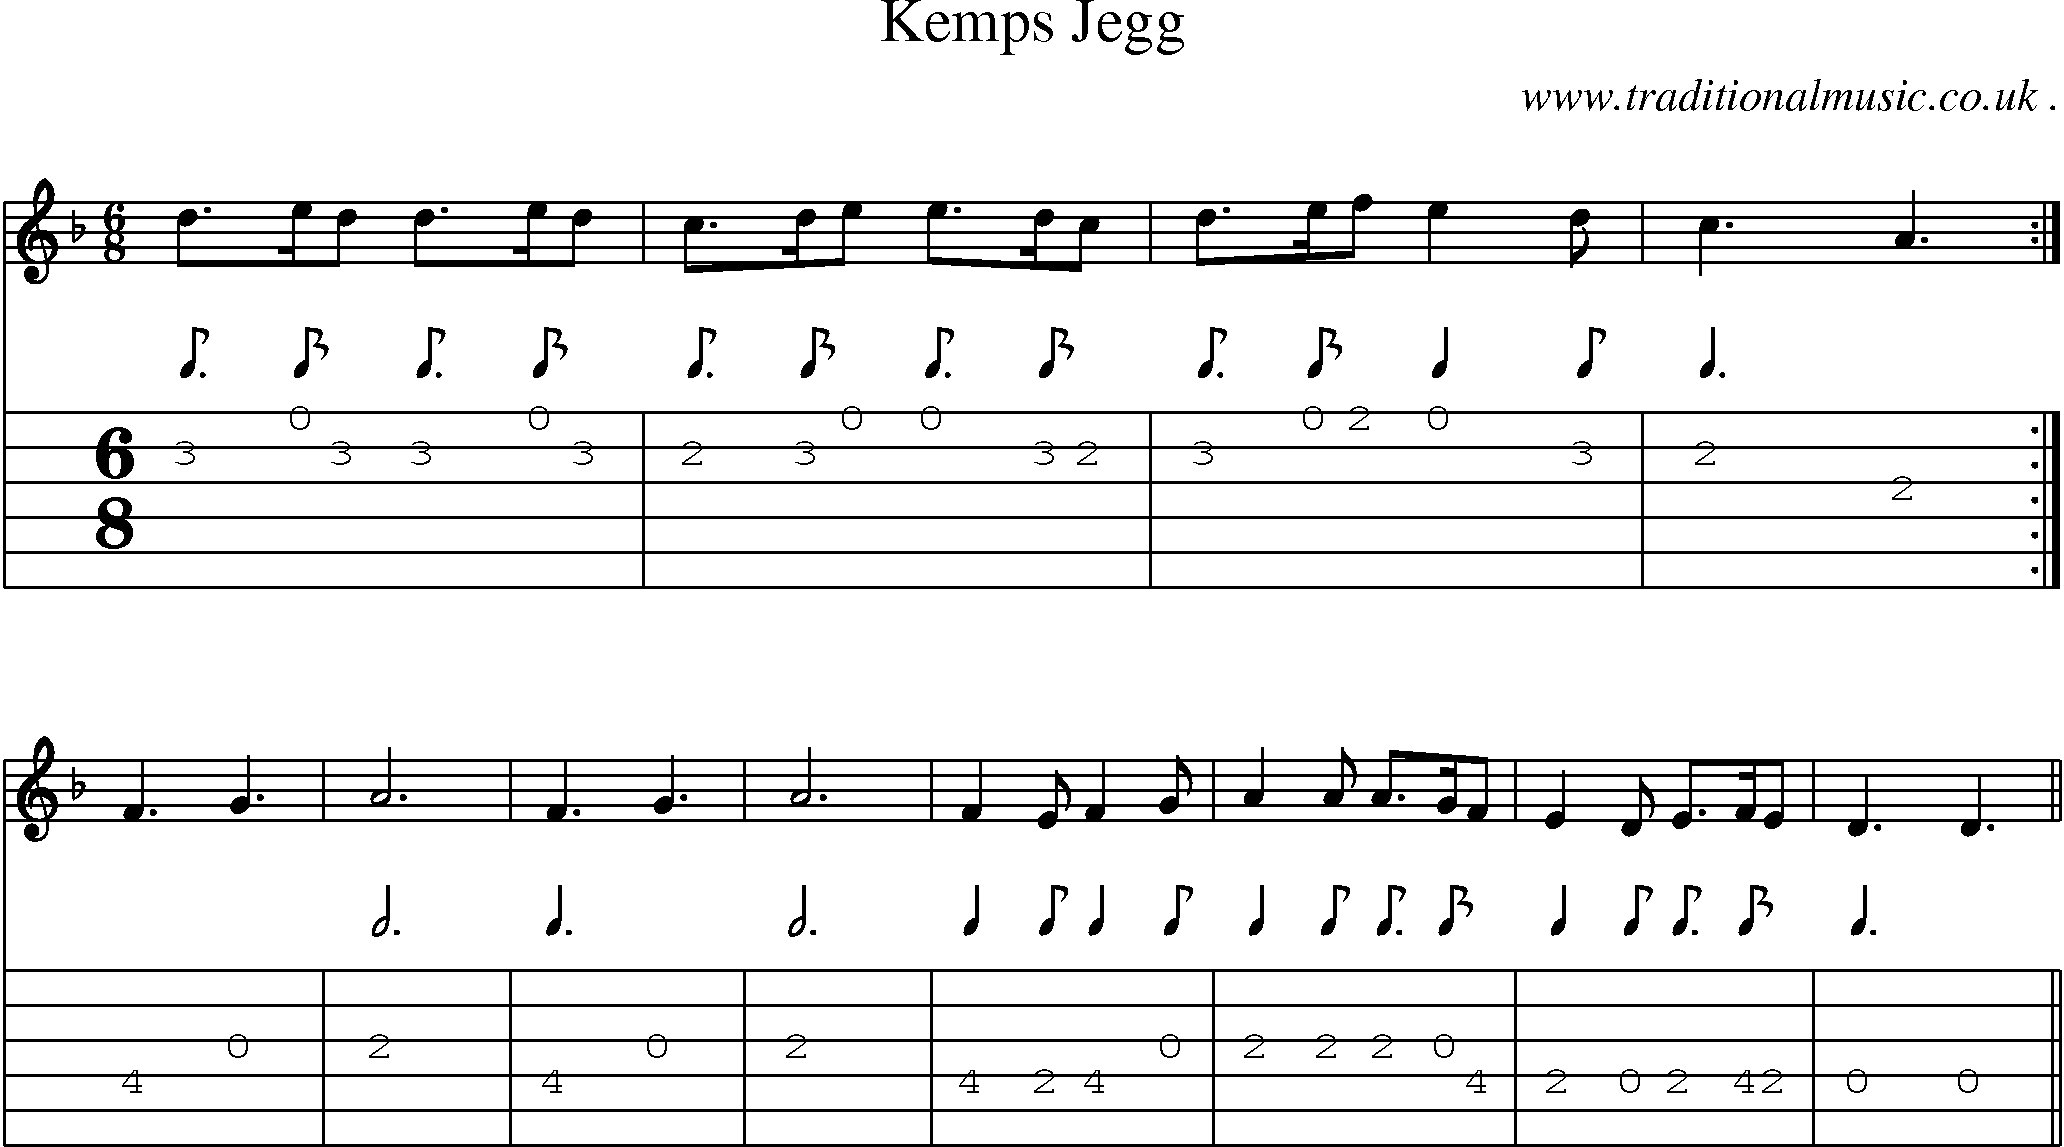 Sheet-Music and Guitar Tabs for Kemps Jegg